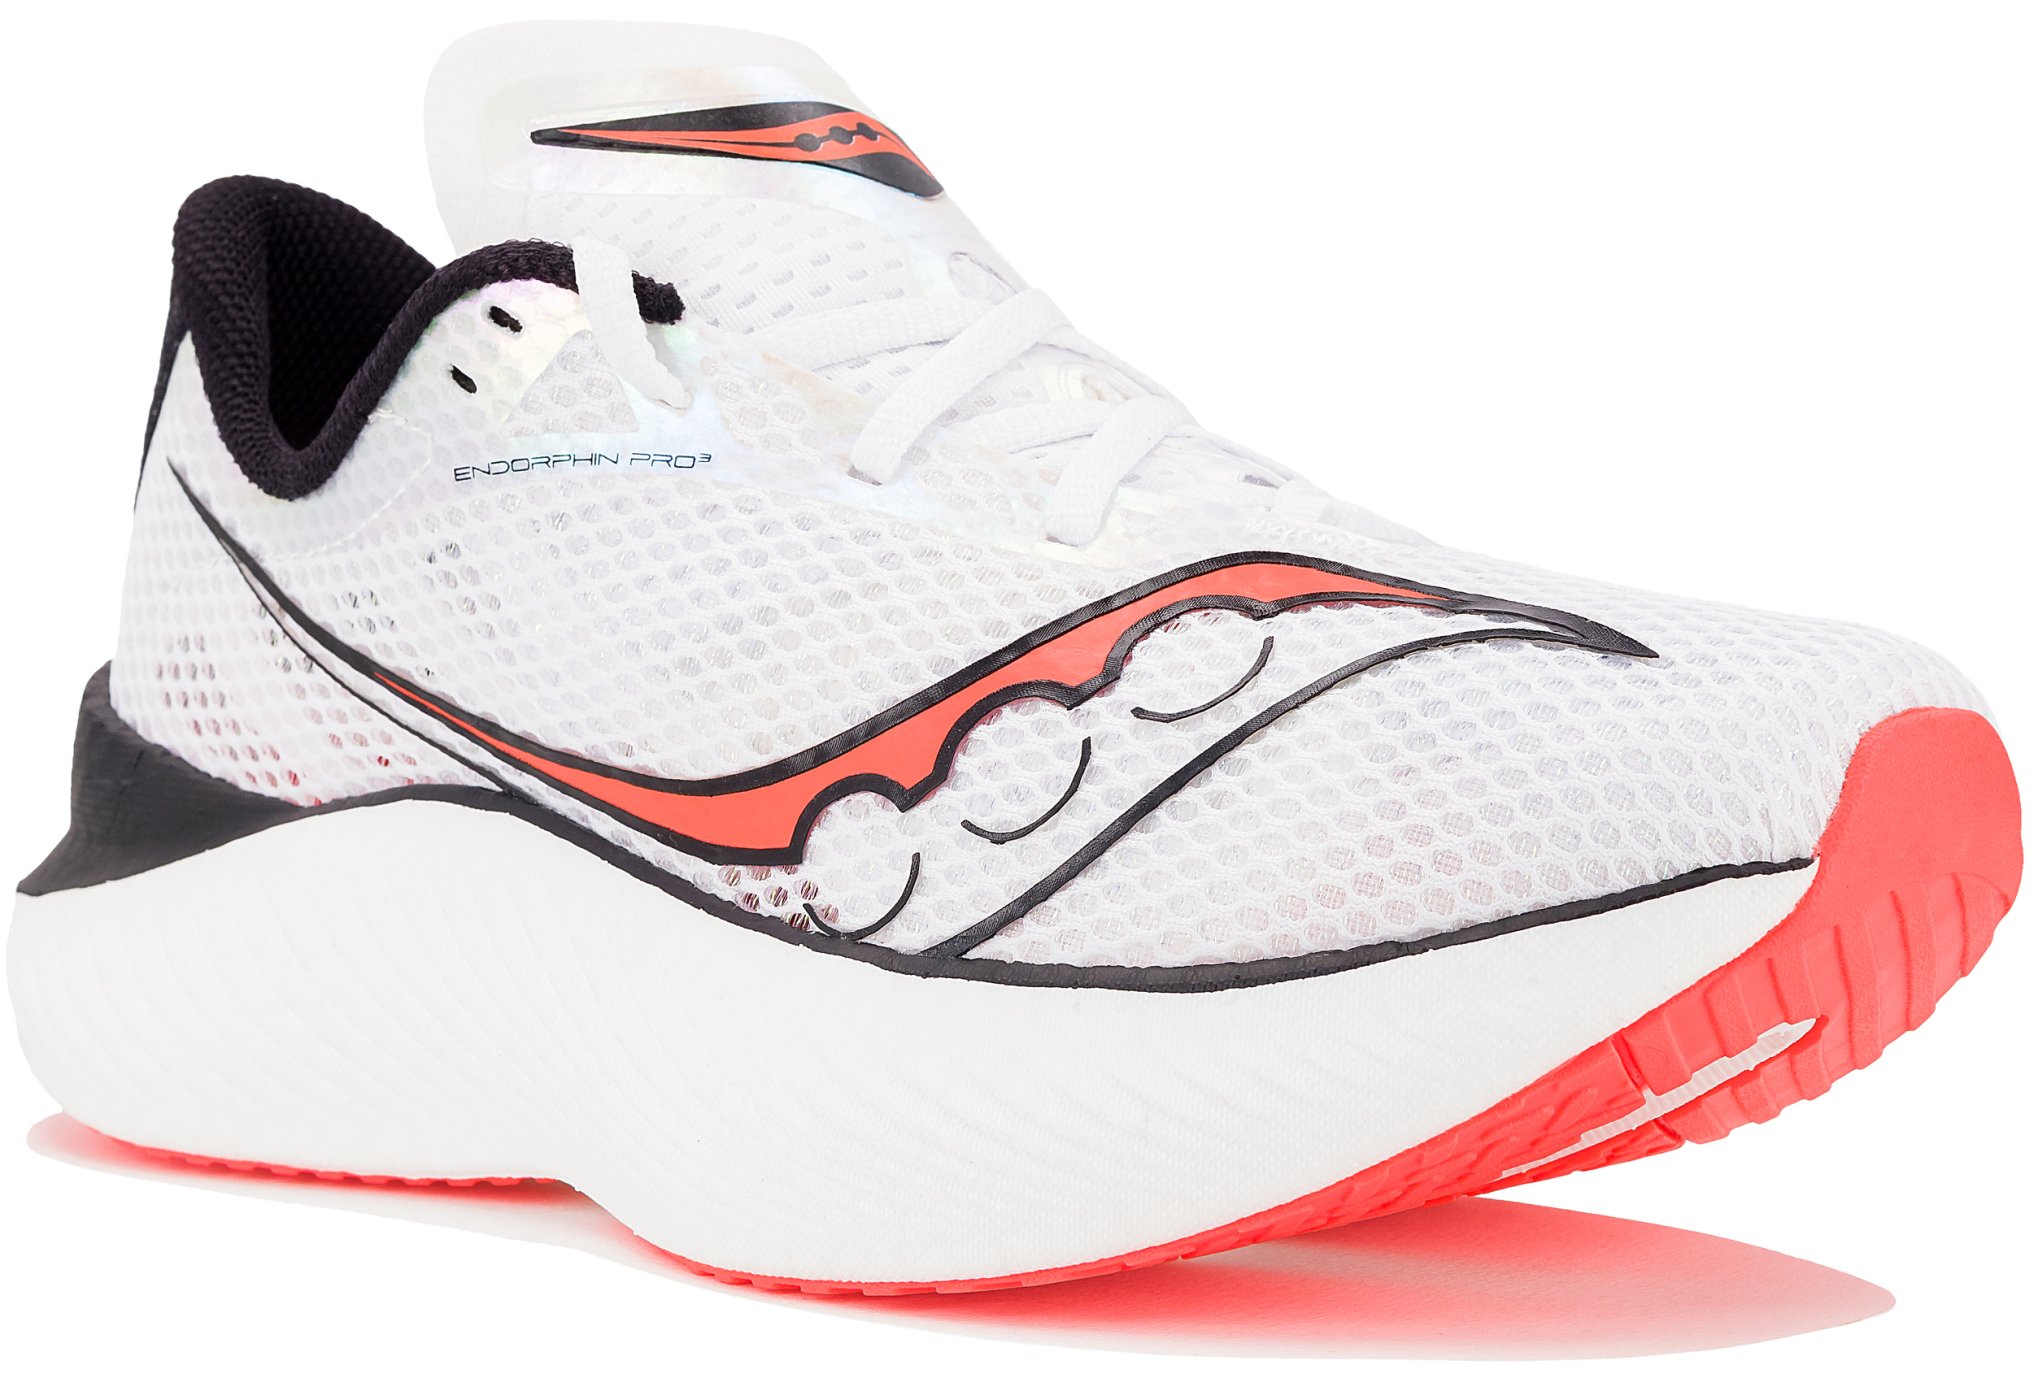 Saucony Endorphin Pro 3 W Chaussures running femme